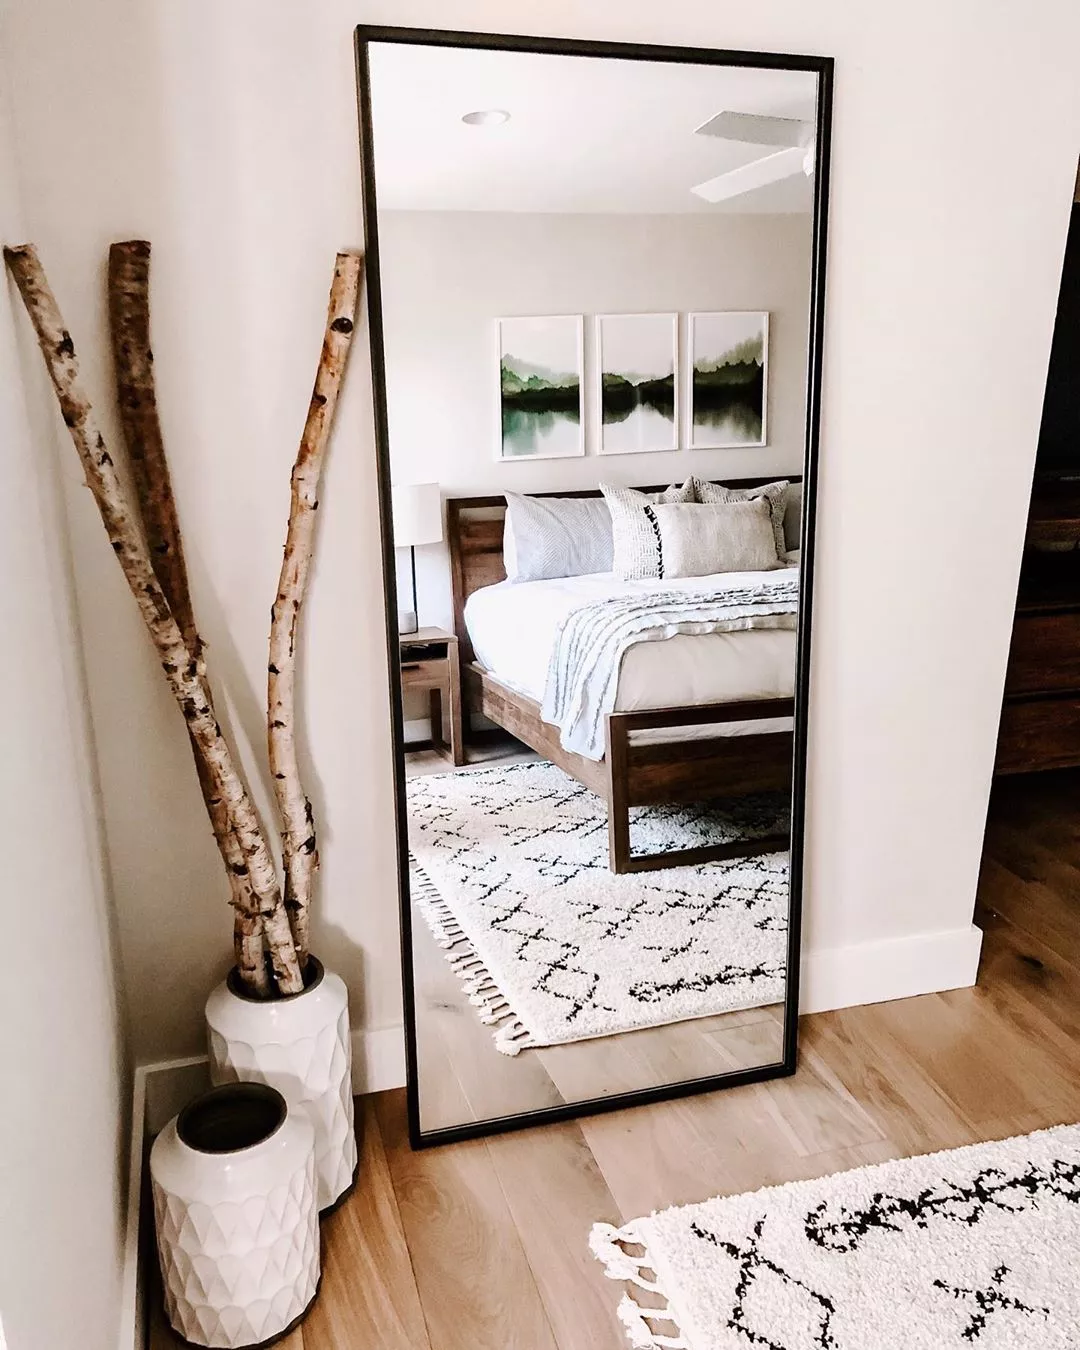 https://www.extraspace.com/blog/wp-content/uploads/2017/02/use-mirrors-small-space-living.jpg.webp